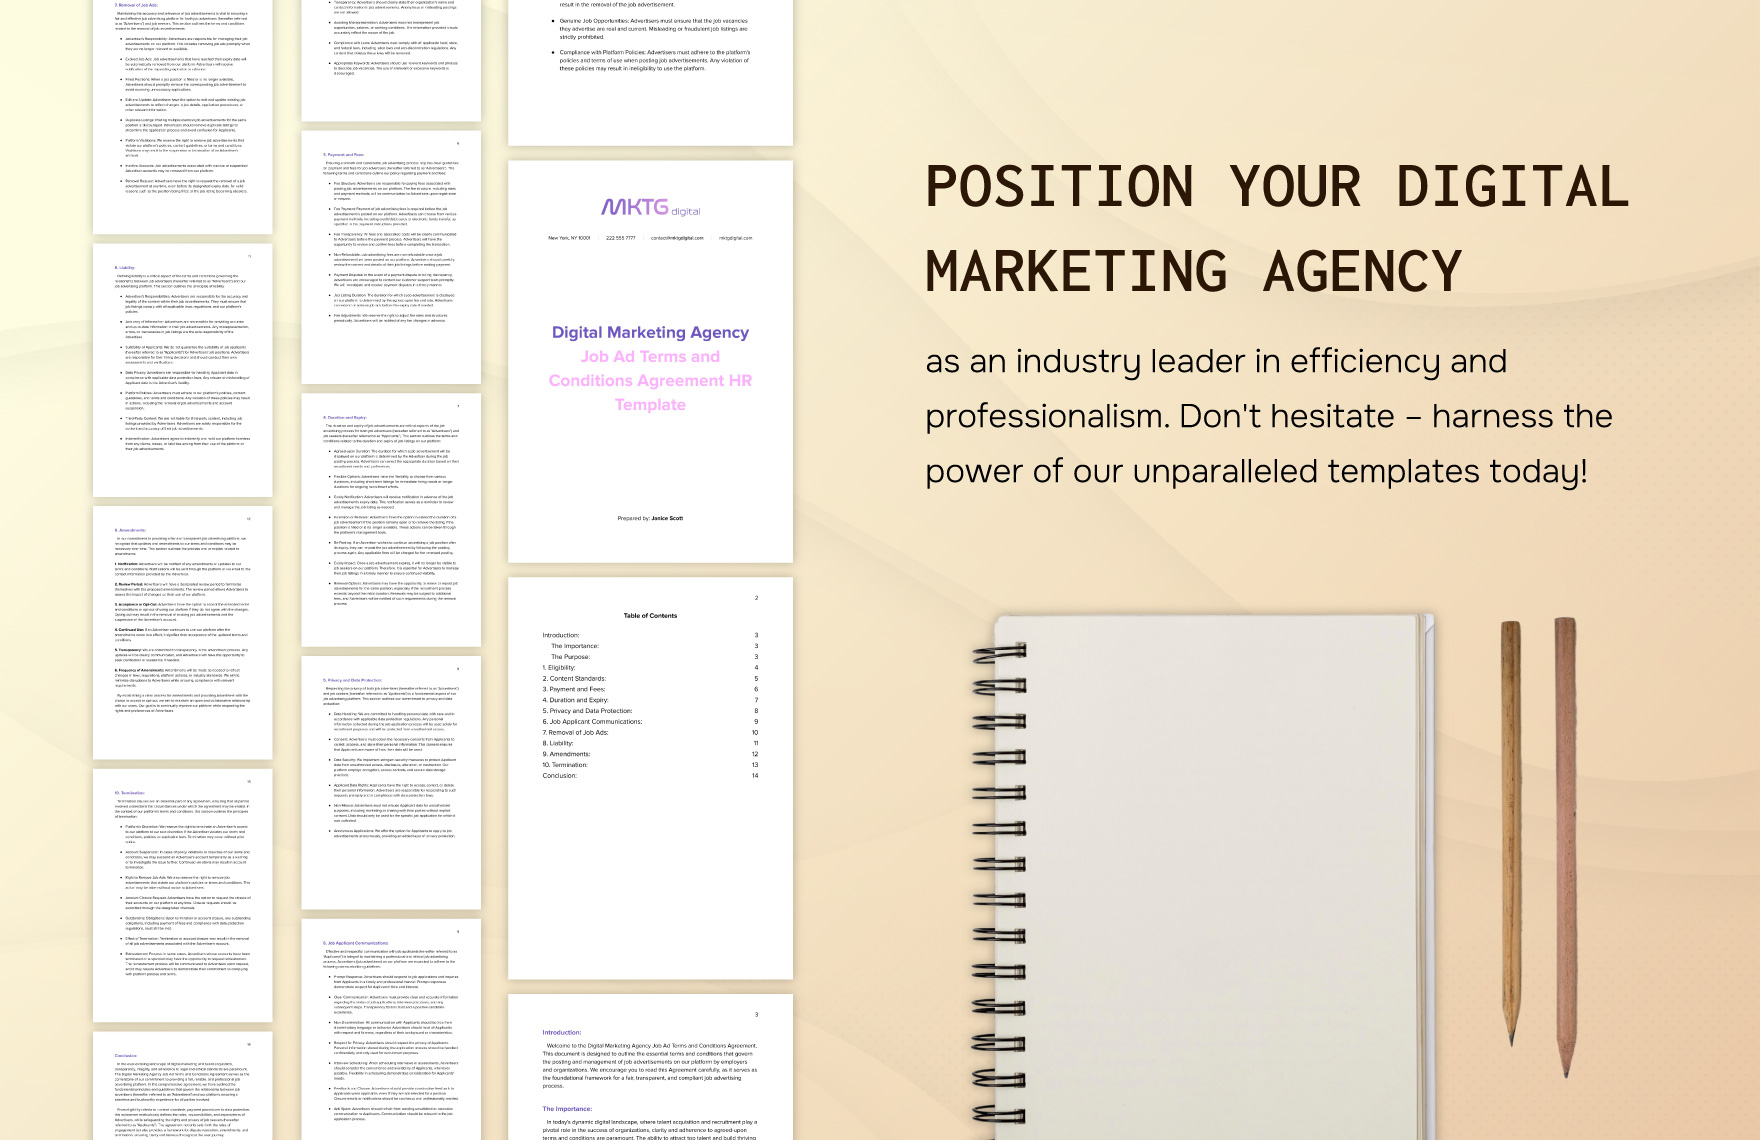 Digital Marketing Agency Job Ad Terms and Conditions Agreement HR Template